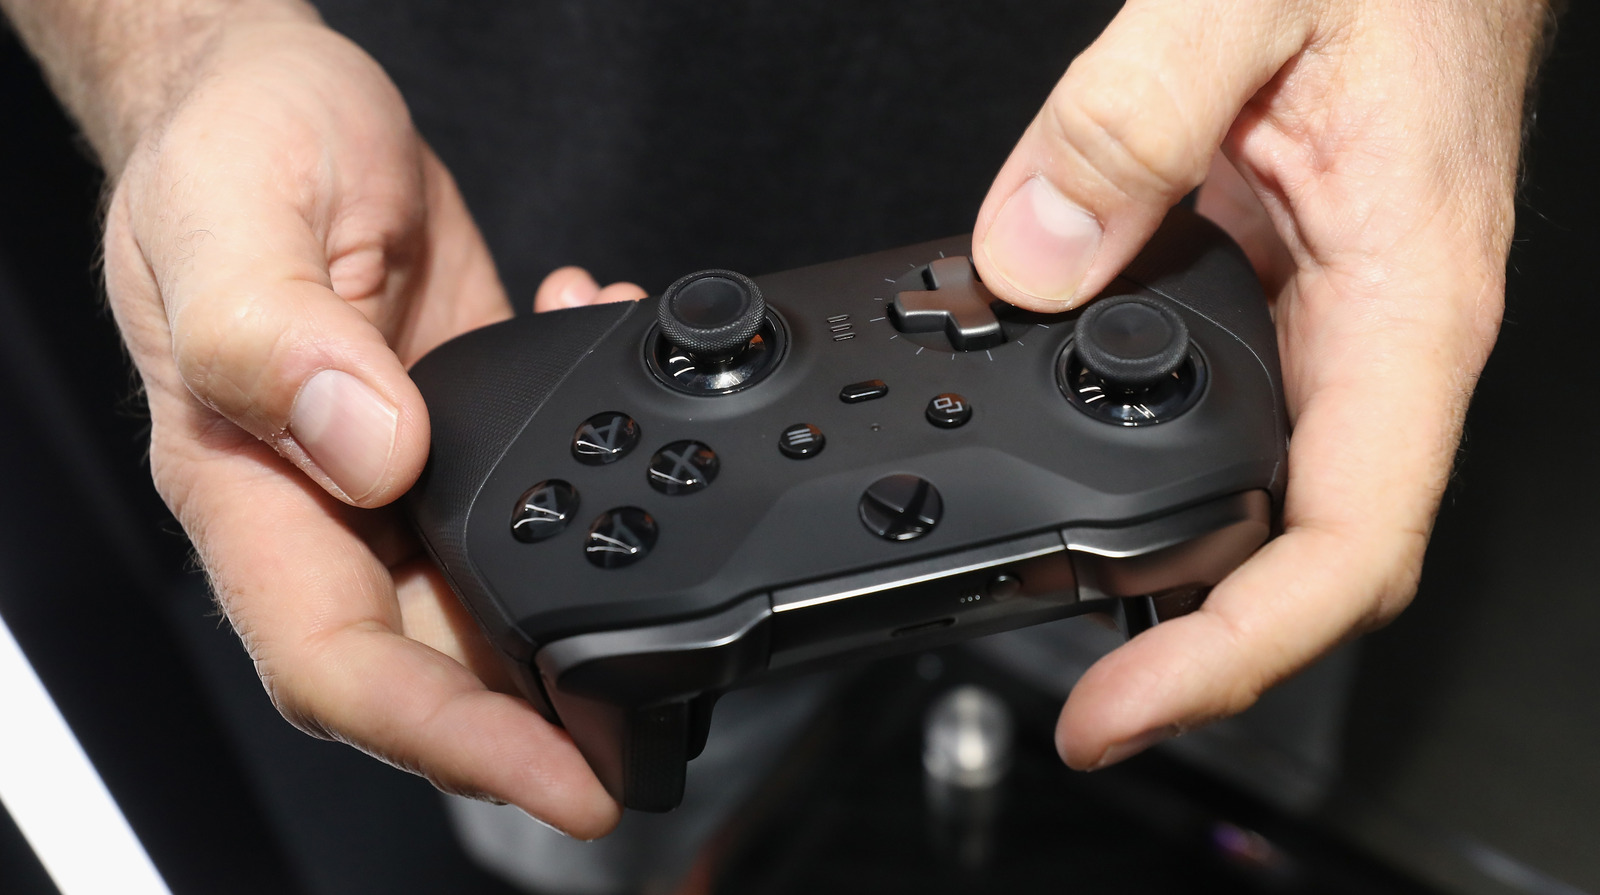 Xbox Will Soon Allow Players To Map Keyboard Shortcuts To Their Controller